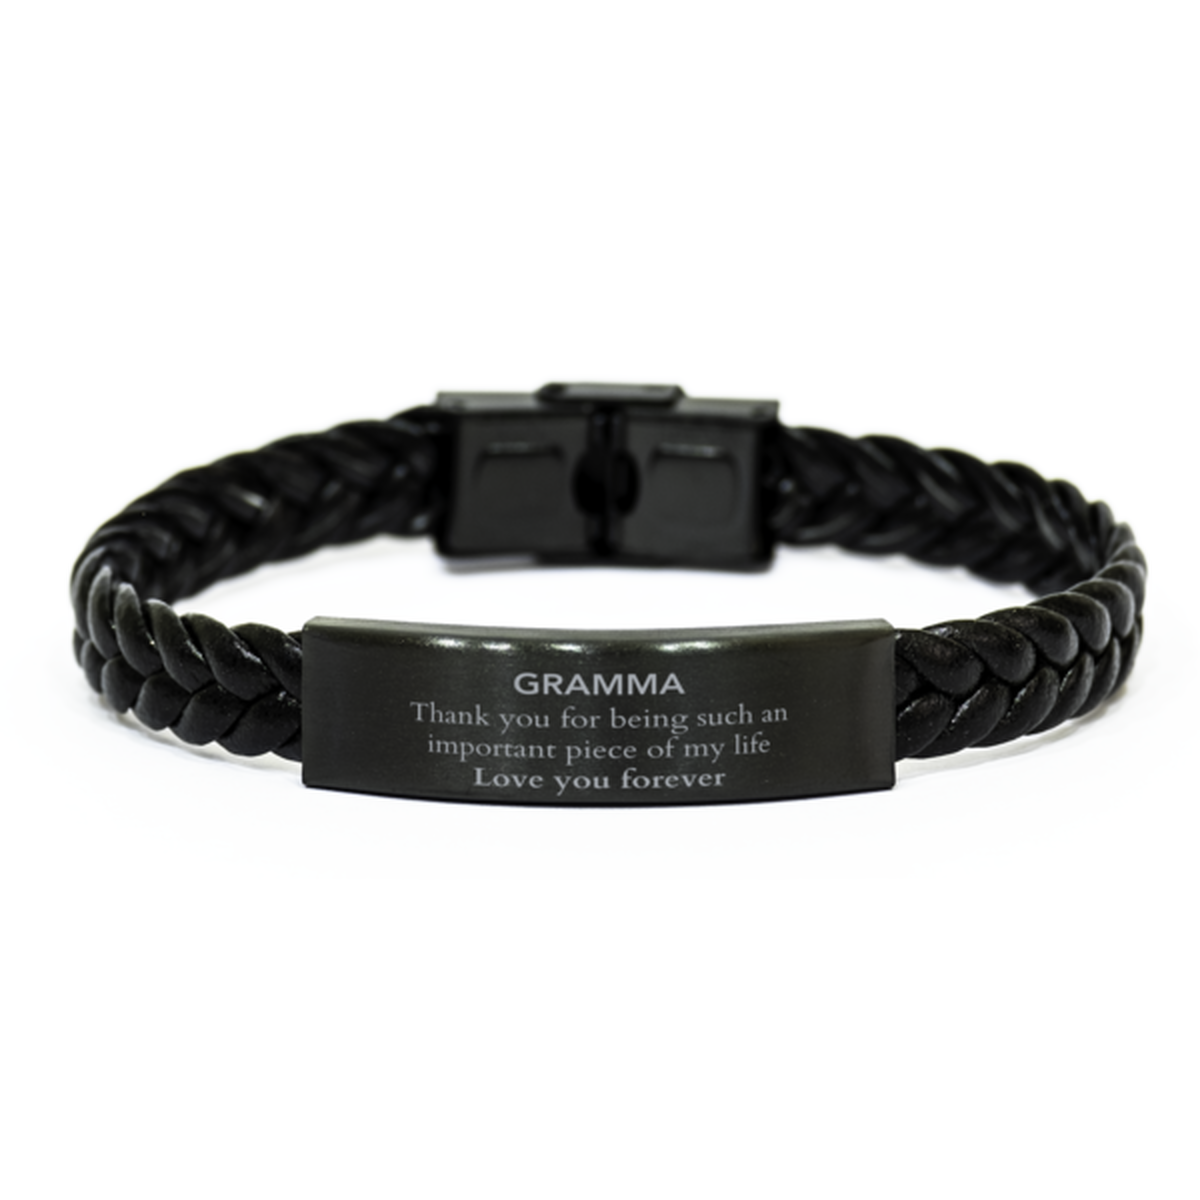 Appropriate Gramma Braided Leather Bracelet Epic Birthday Gifts for Gramma Thank you for being such an important piece of my life Gramma Christmas Mothers Fathers Day